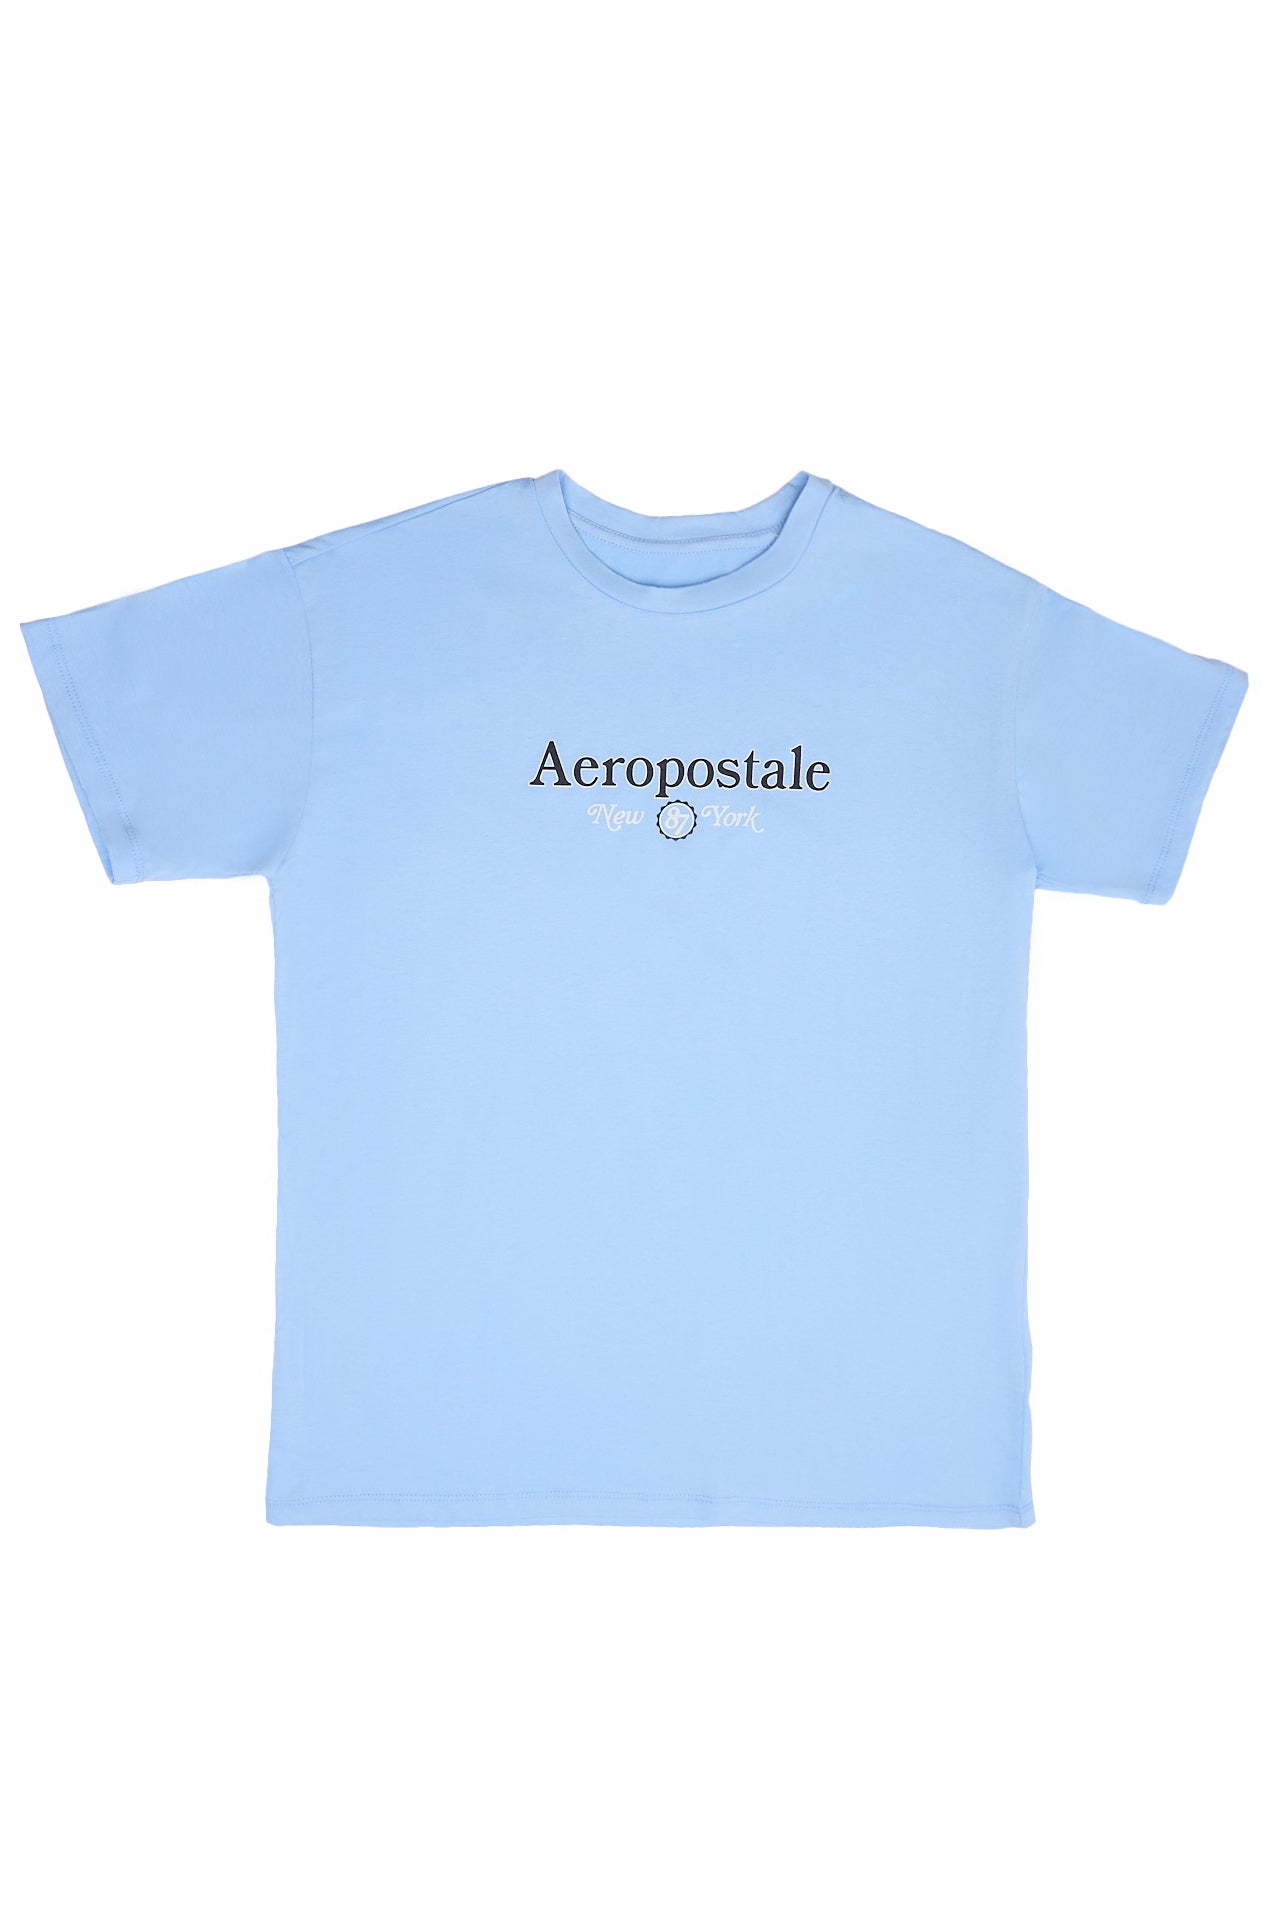 Aéropostale 87 New York Graphic Relaxed Tee